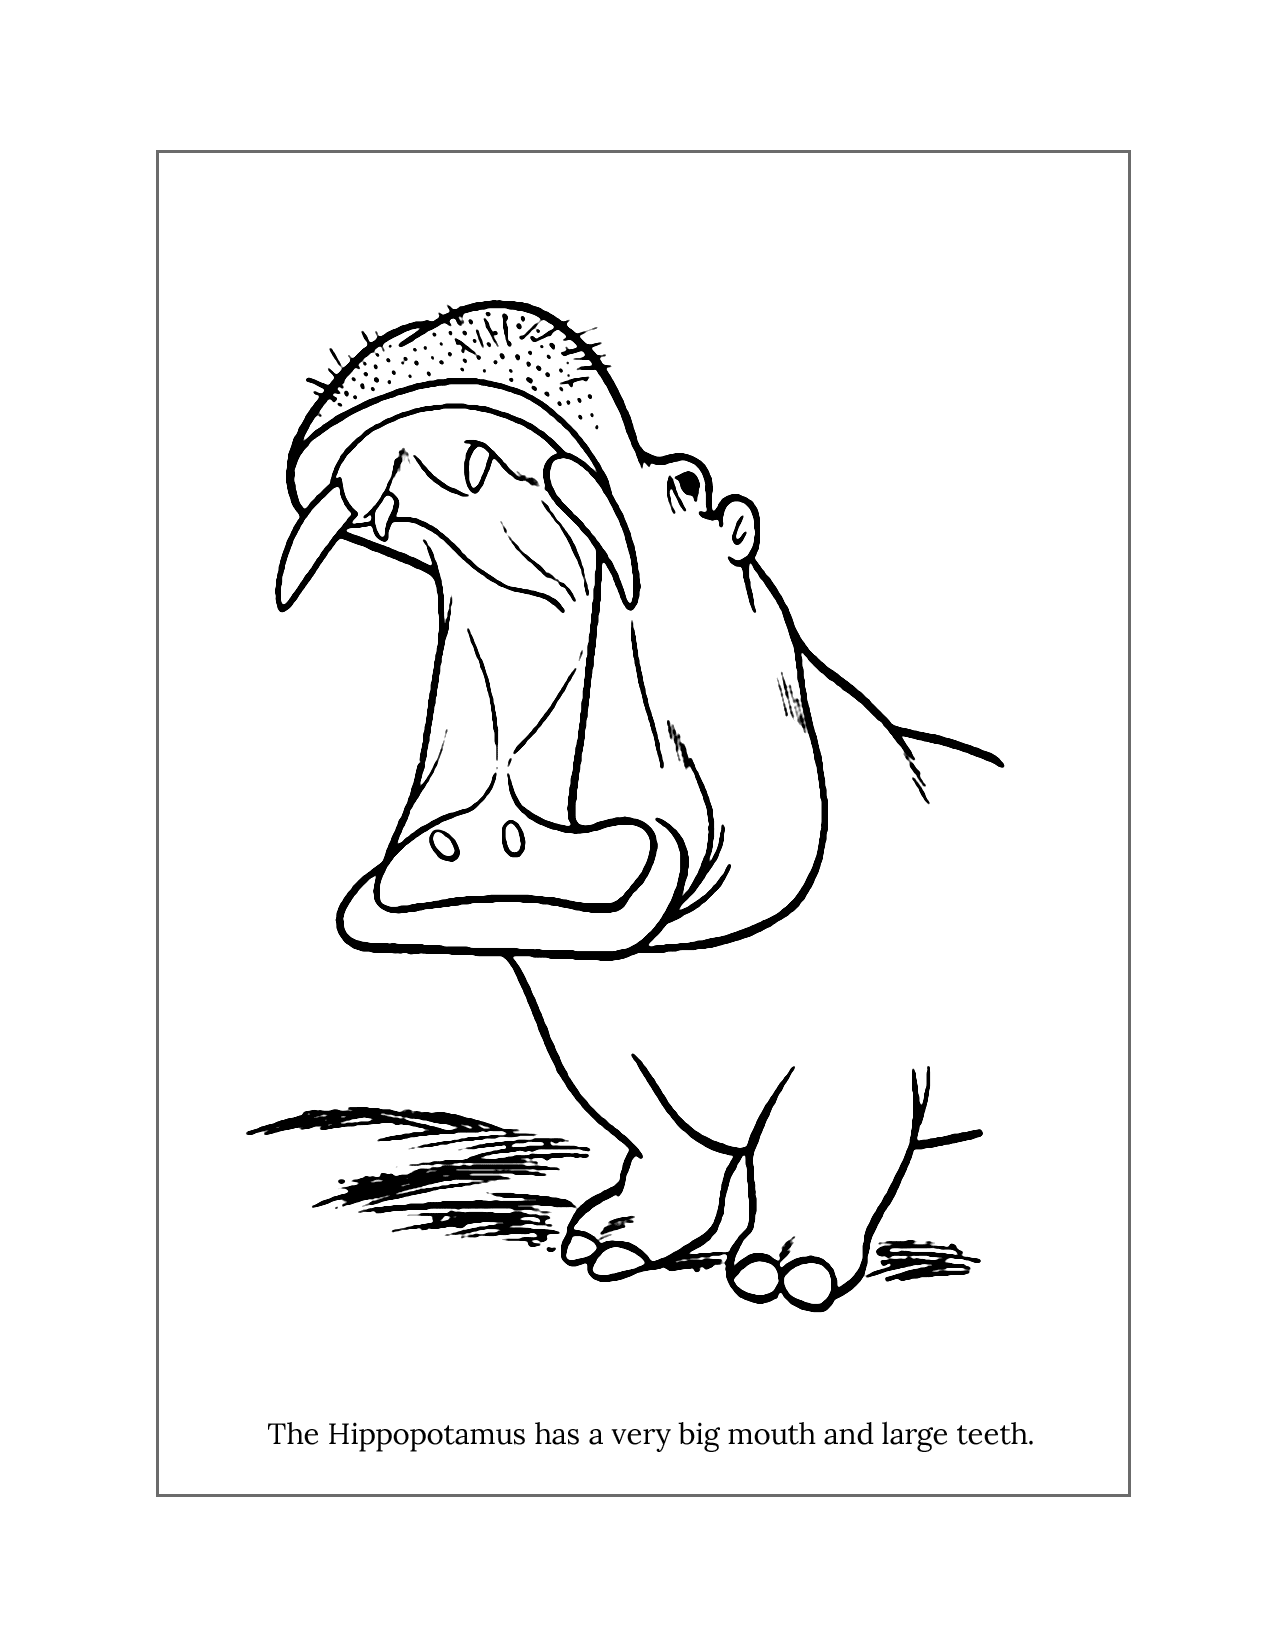 Hippopotamus Mouth Coloring Page